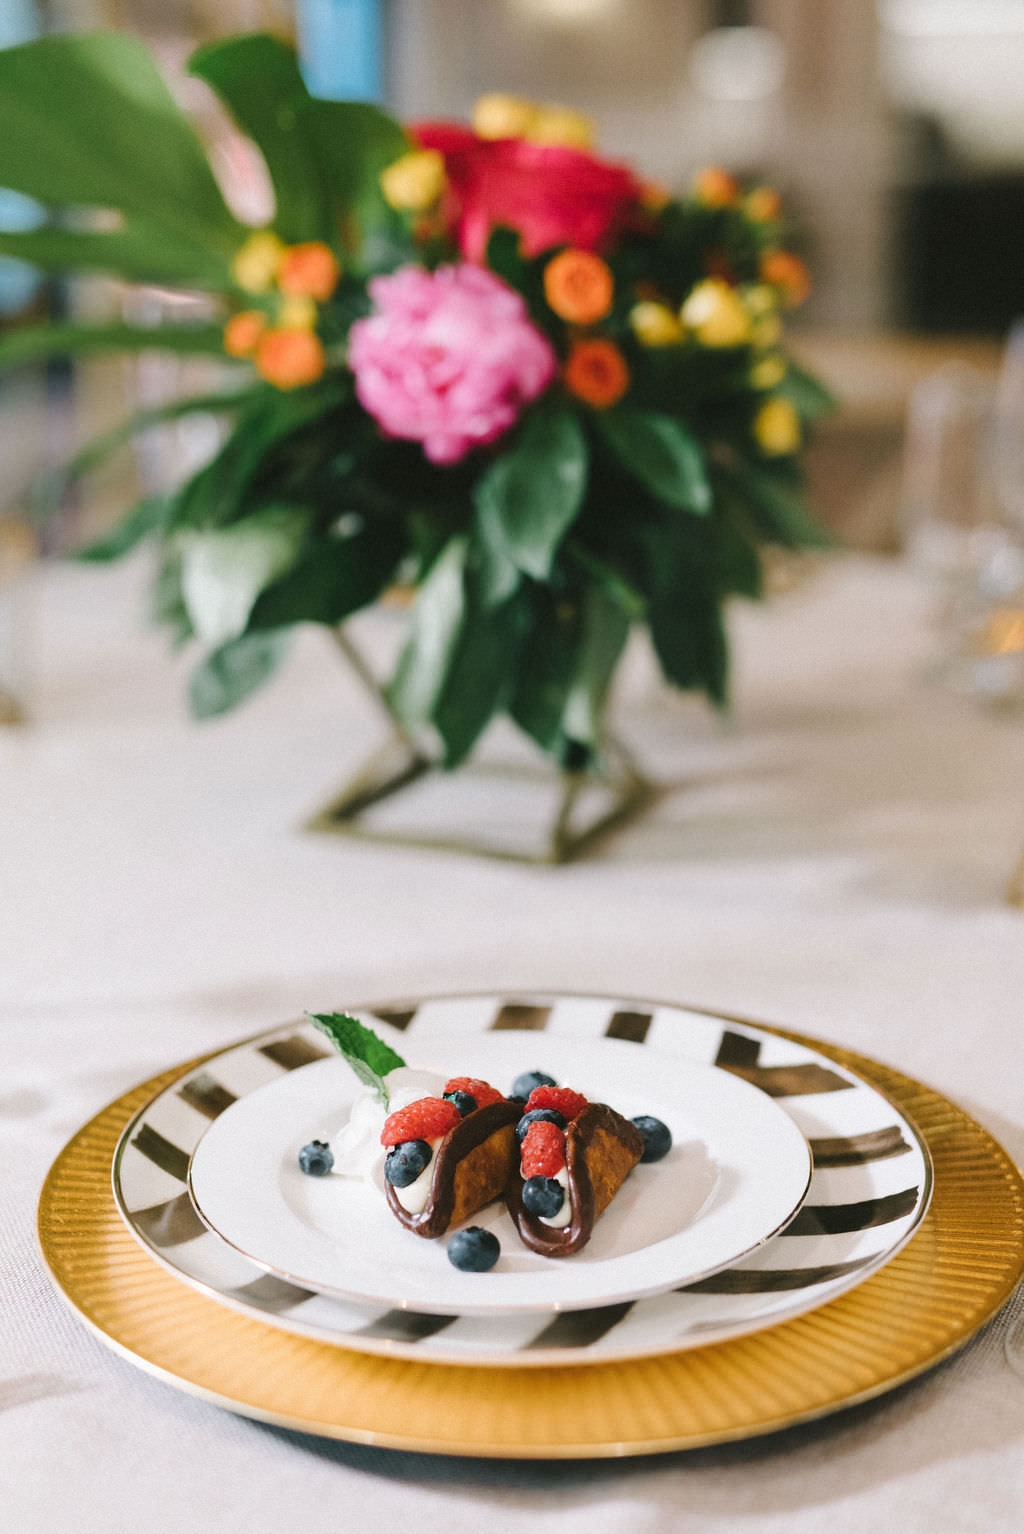 Wedding Dessert Mini Chocolate Tacos with Berries on Gold and White Plate and Gold Charger | Tampa Bay Wedding Photographer Kera Photography | Wedding Linens and Tabletop Rentals Kate Ryan Event Rentals | Downtown St. Petersburg Wedding Caterer Red Mesa Events